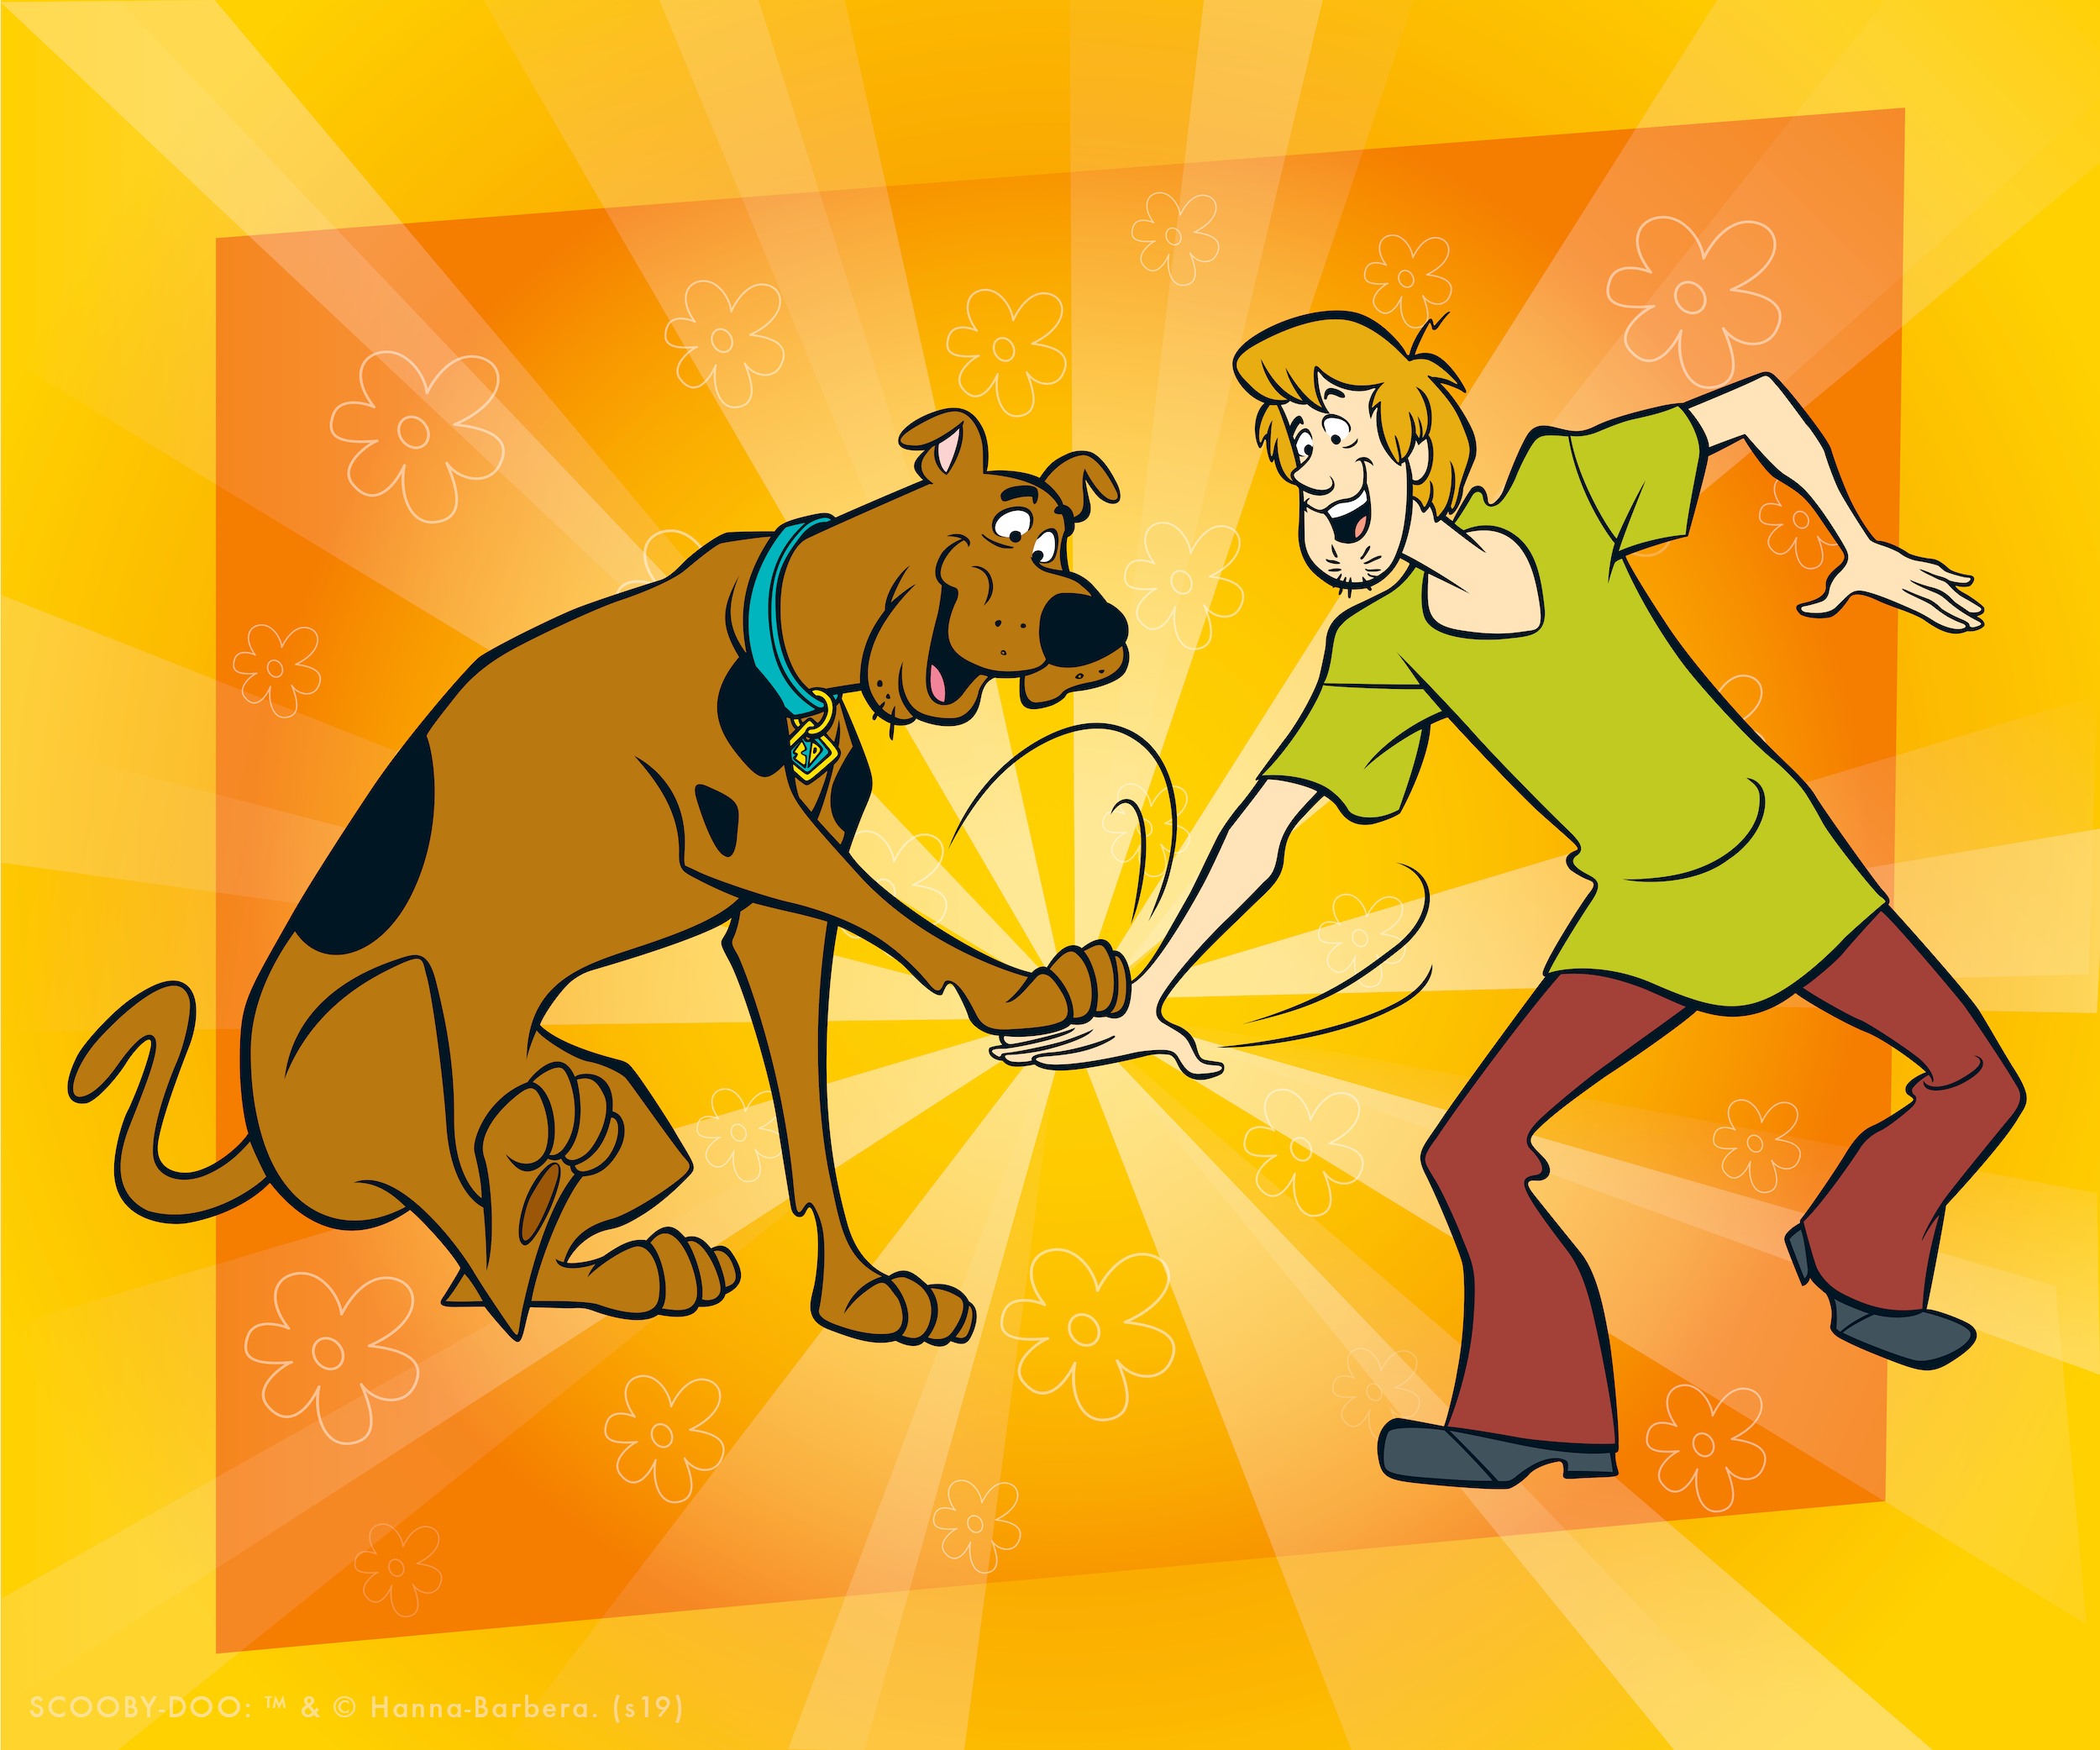 [News] SCOOBY-DOO AND THE LOST CITY OF GOLD Stage Production Announced!